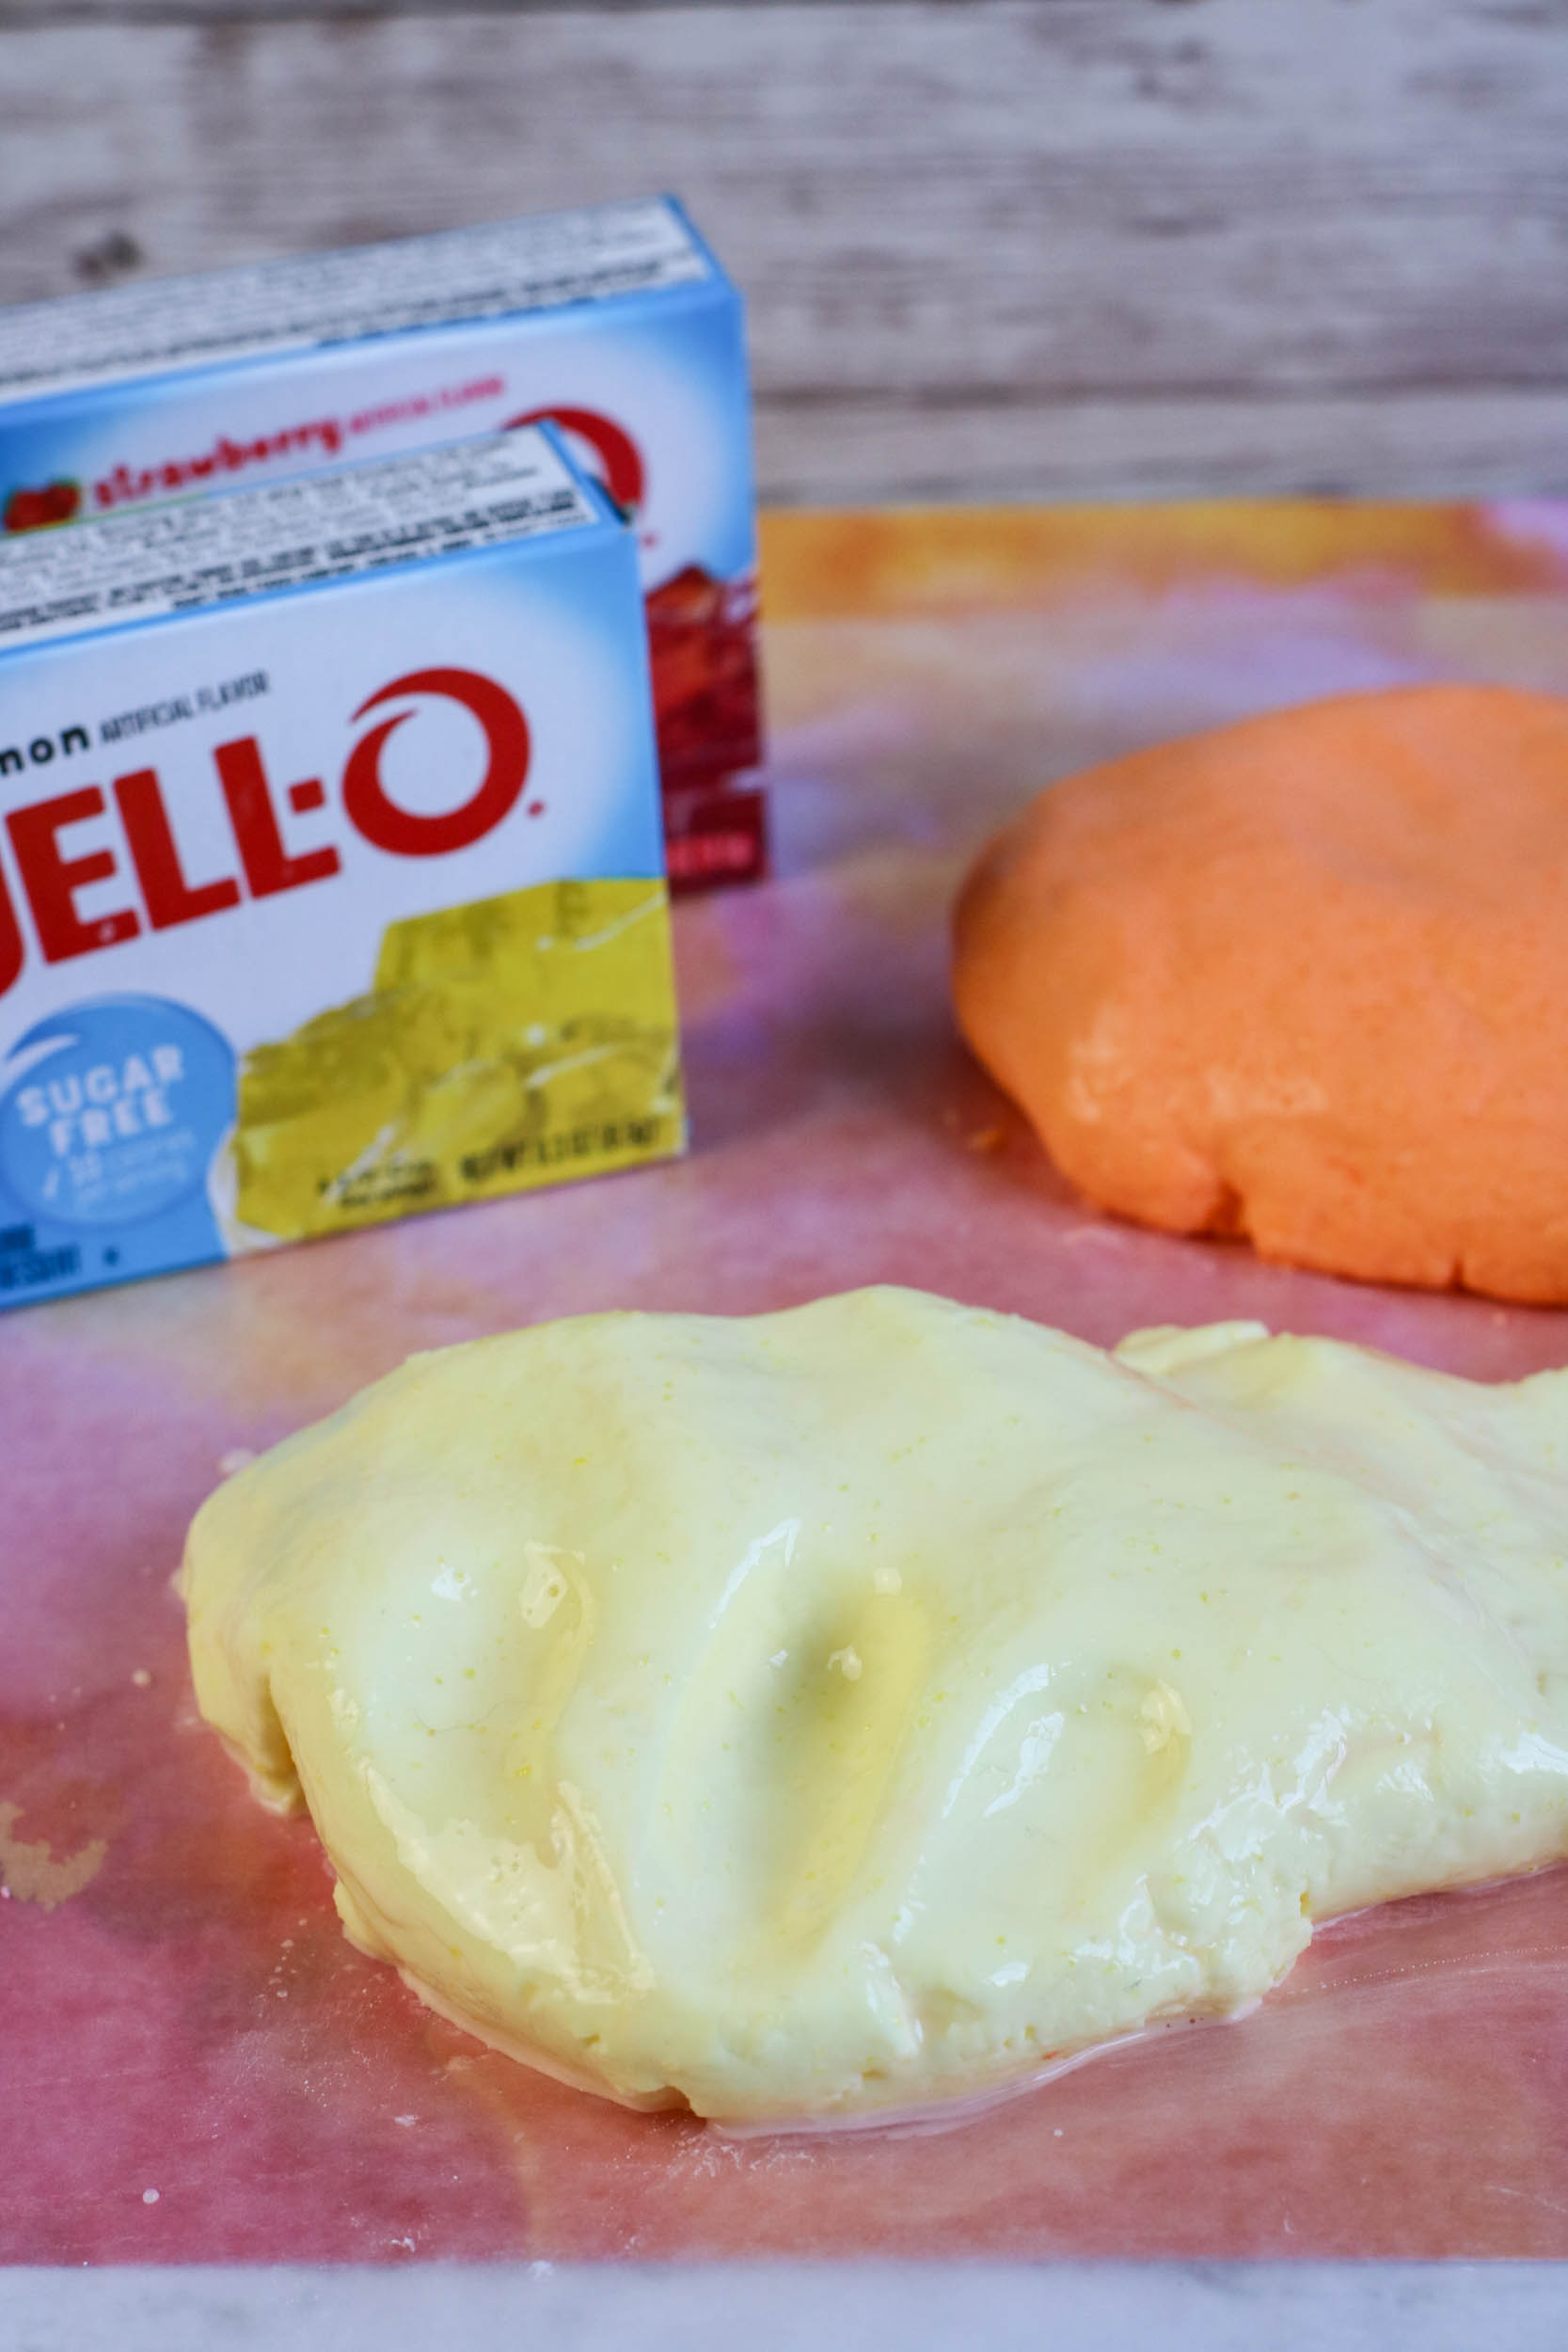 How to Make Edible Slime From Jello